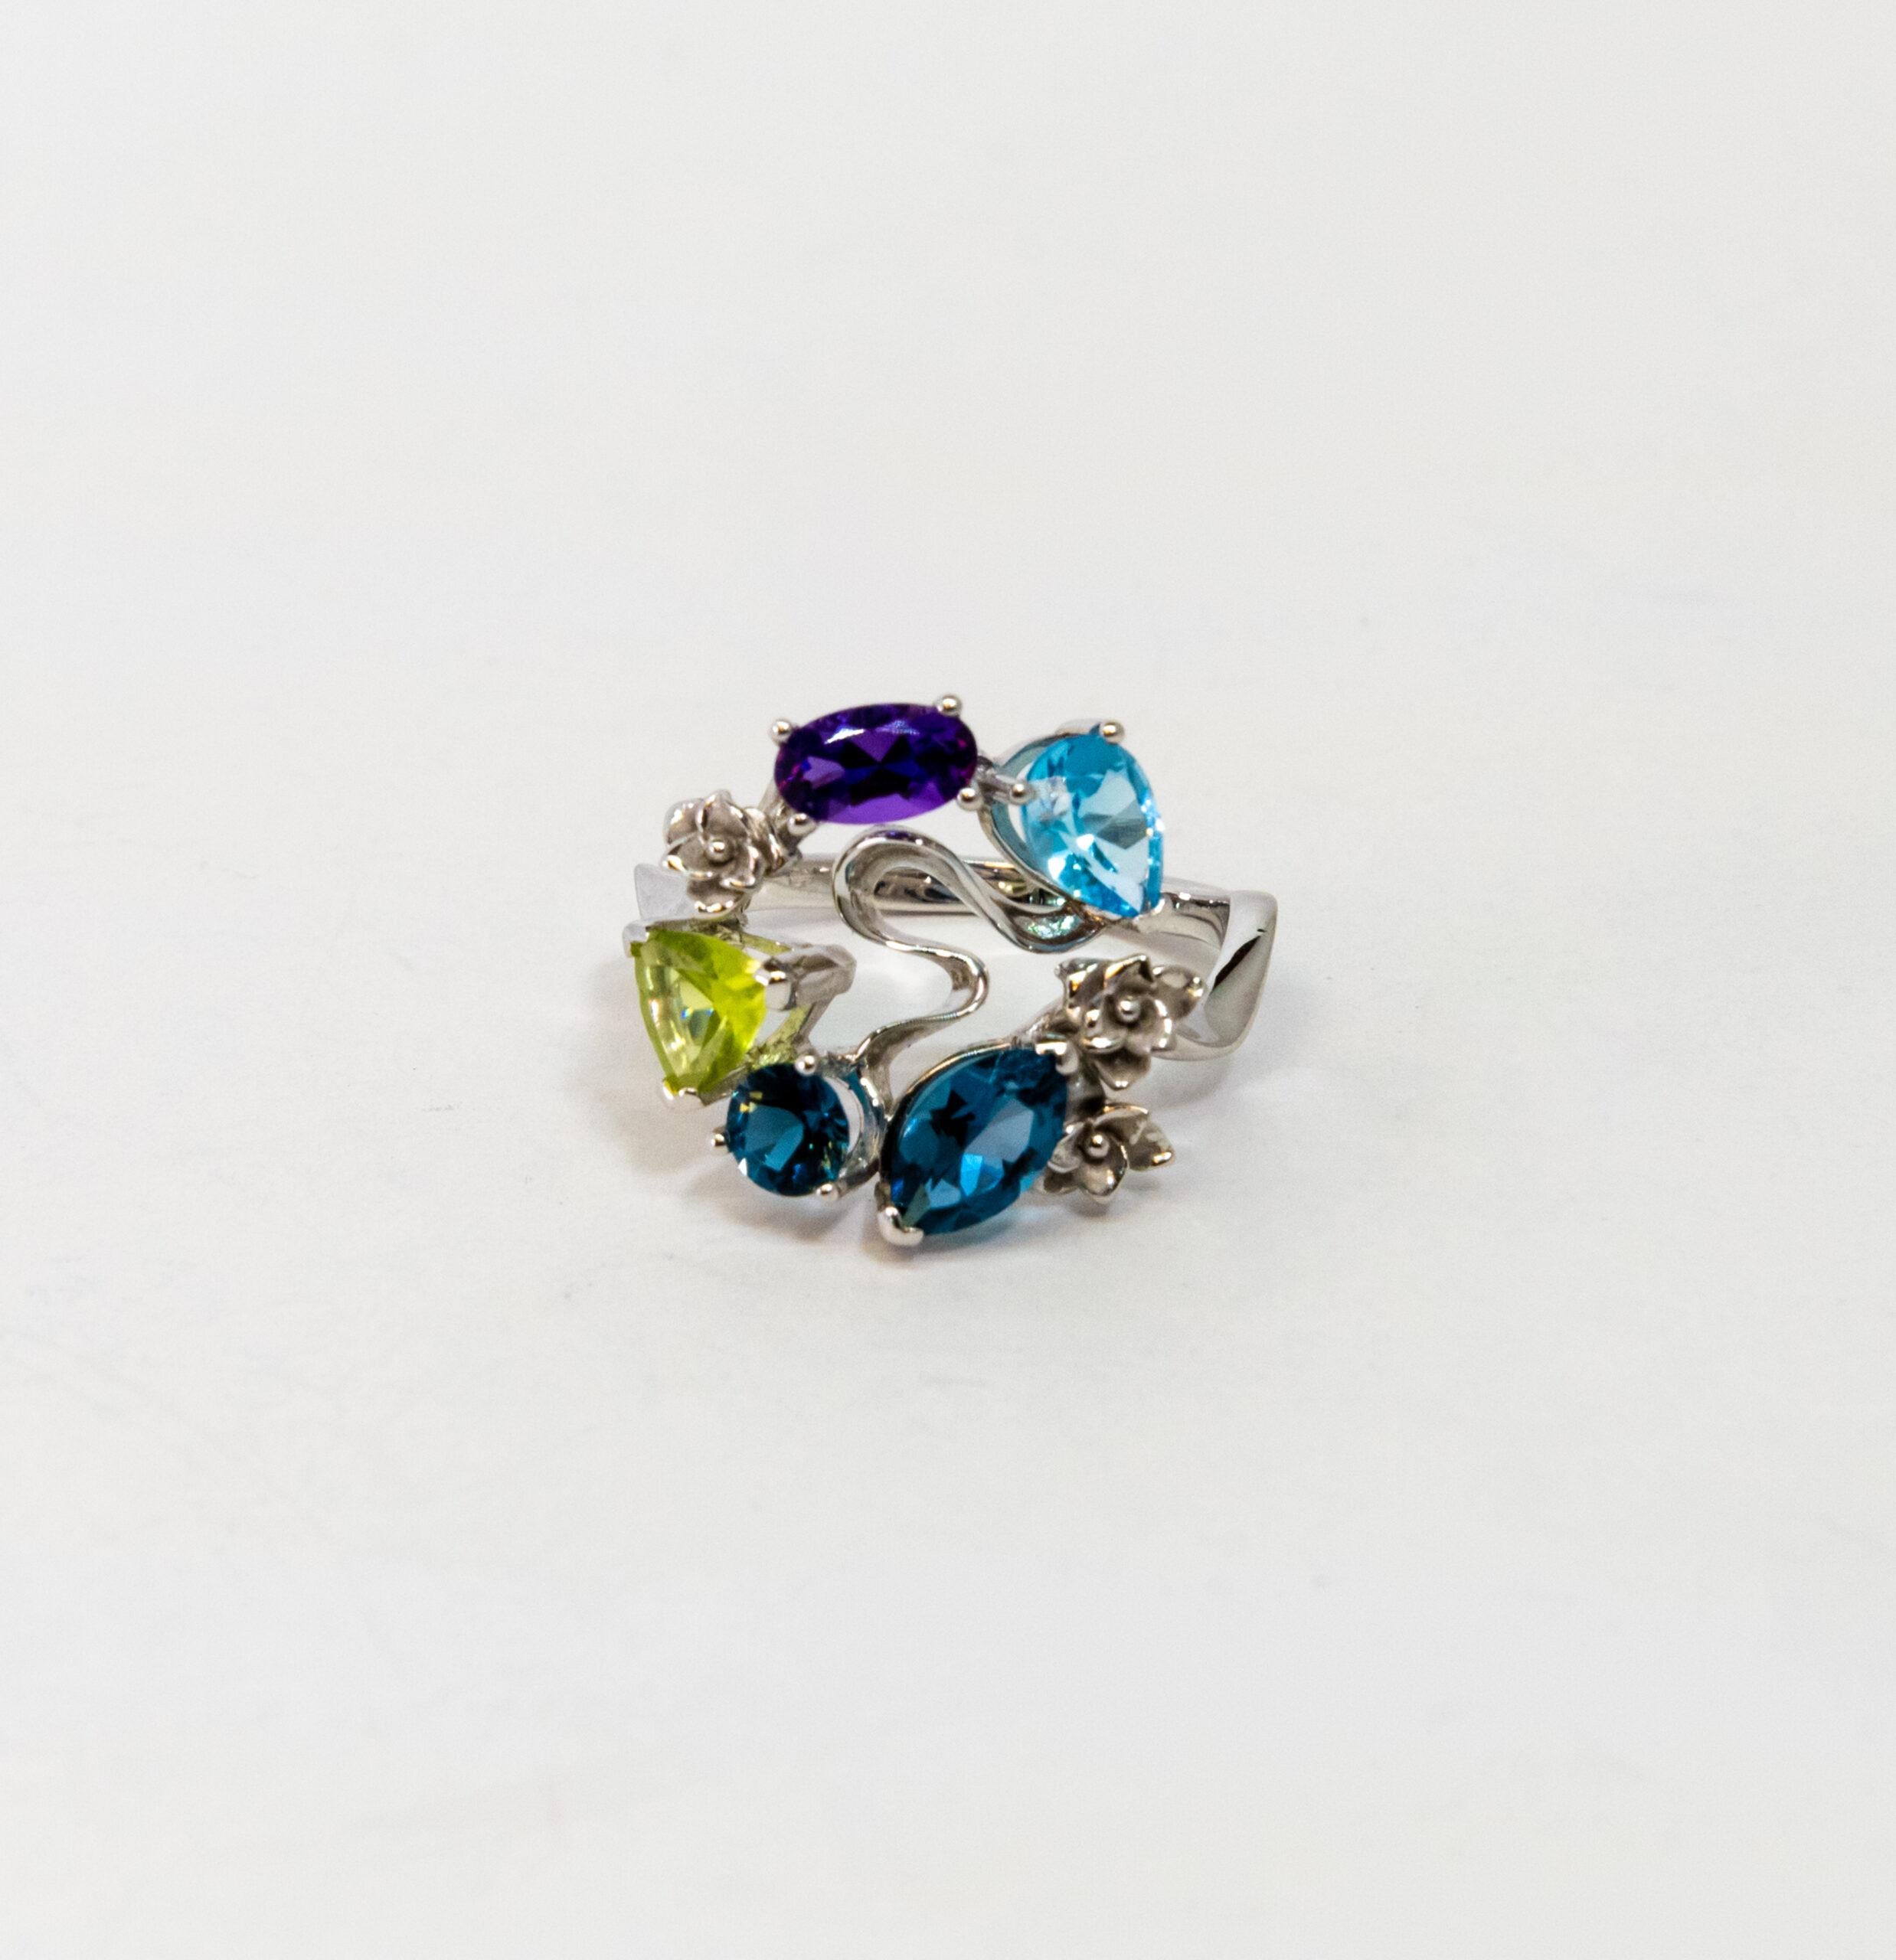 This ring is made of 18K White Gold. The ring set with light blue, purple, and light green sapphires totaling ~2.18ct.

Size – 53.5 (6.5 US)